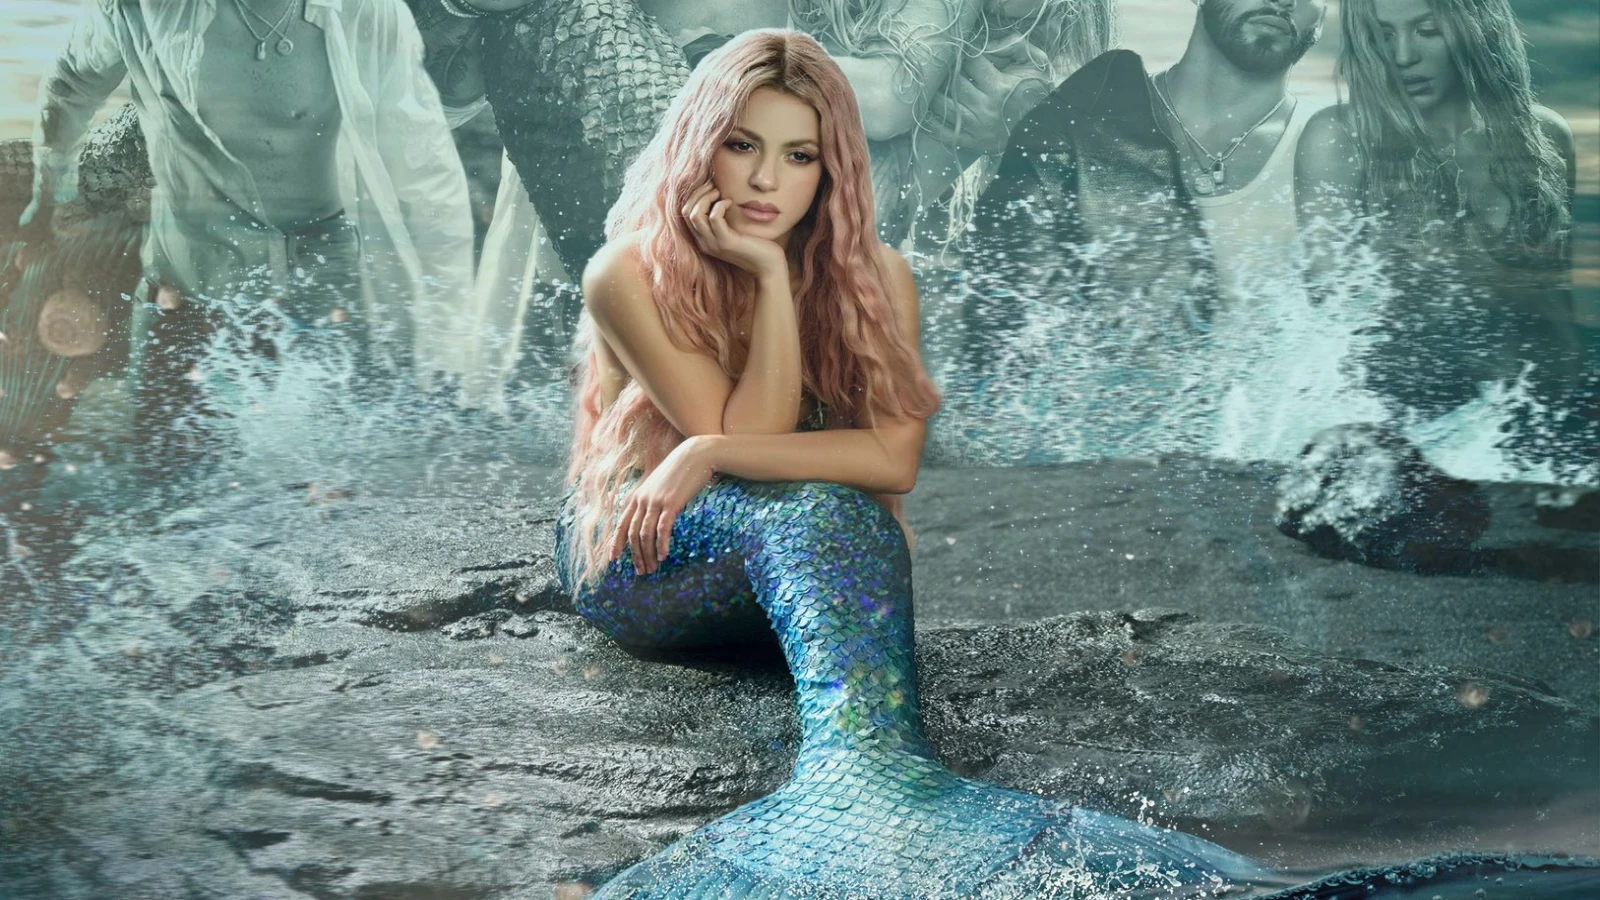 Copa Vacia: Is Shakira's new mermaid song with Manuel Turizo a dig at  former boyfriend Gerard Pique? Find out